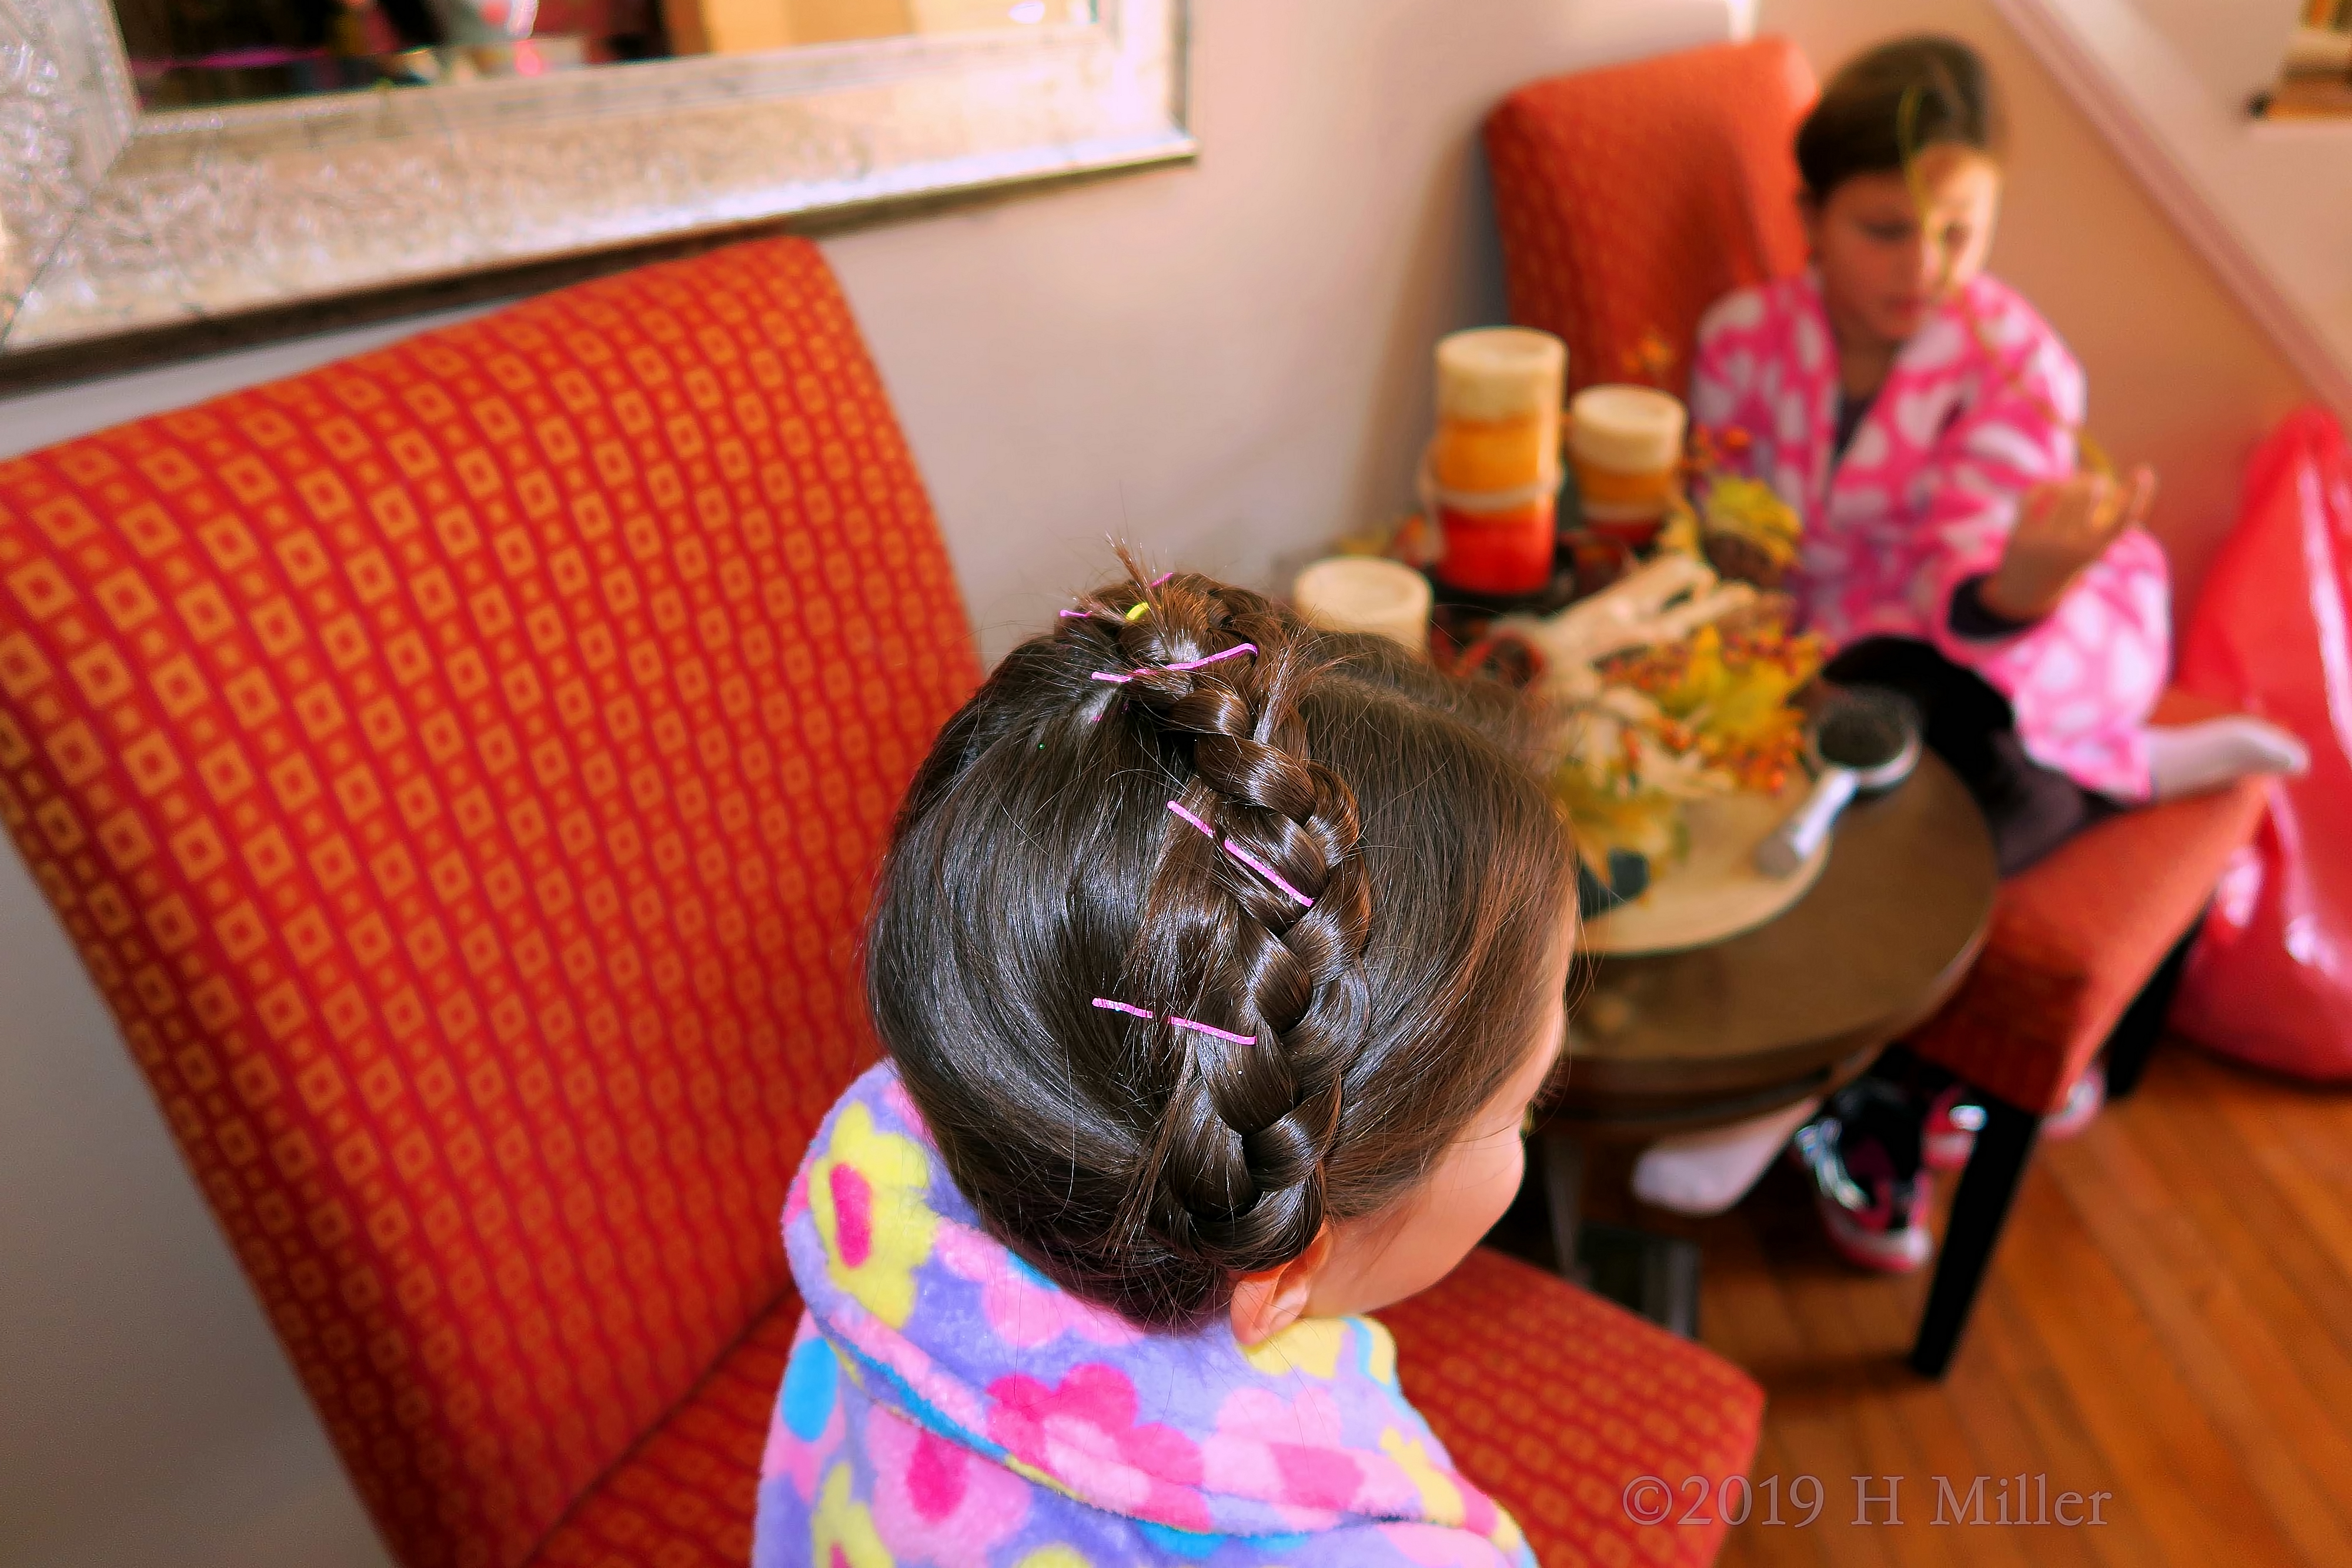 Bobby Pins And Braids! Heidi Braids Kids Hairstyle On Spa Party Guest! 4